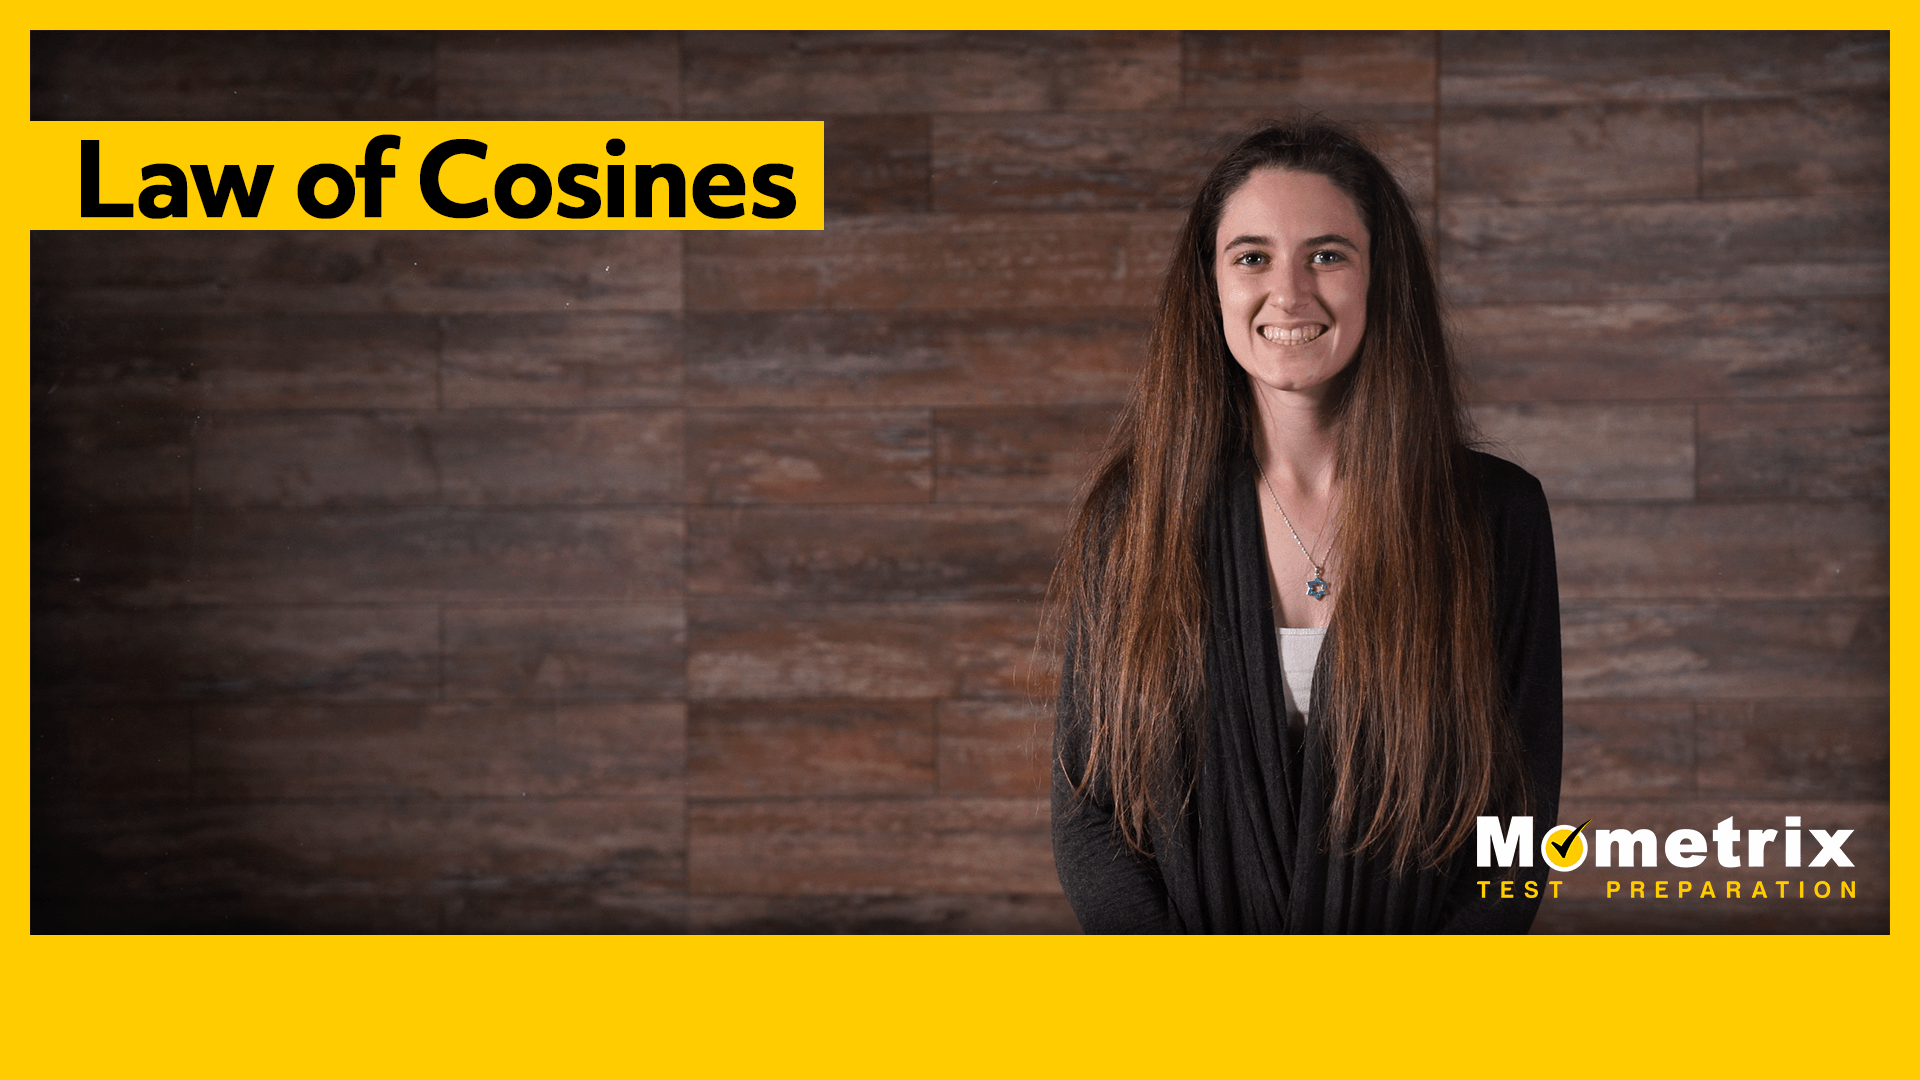 A woman with long brown hair stands in front of a wooden wall background. The text on the image reads "Law of Cosines" and "Mometrix Test Preparation.